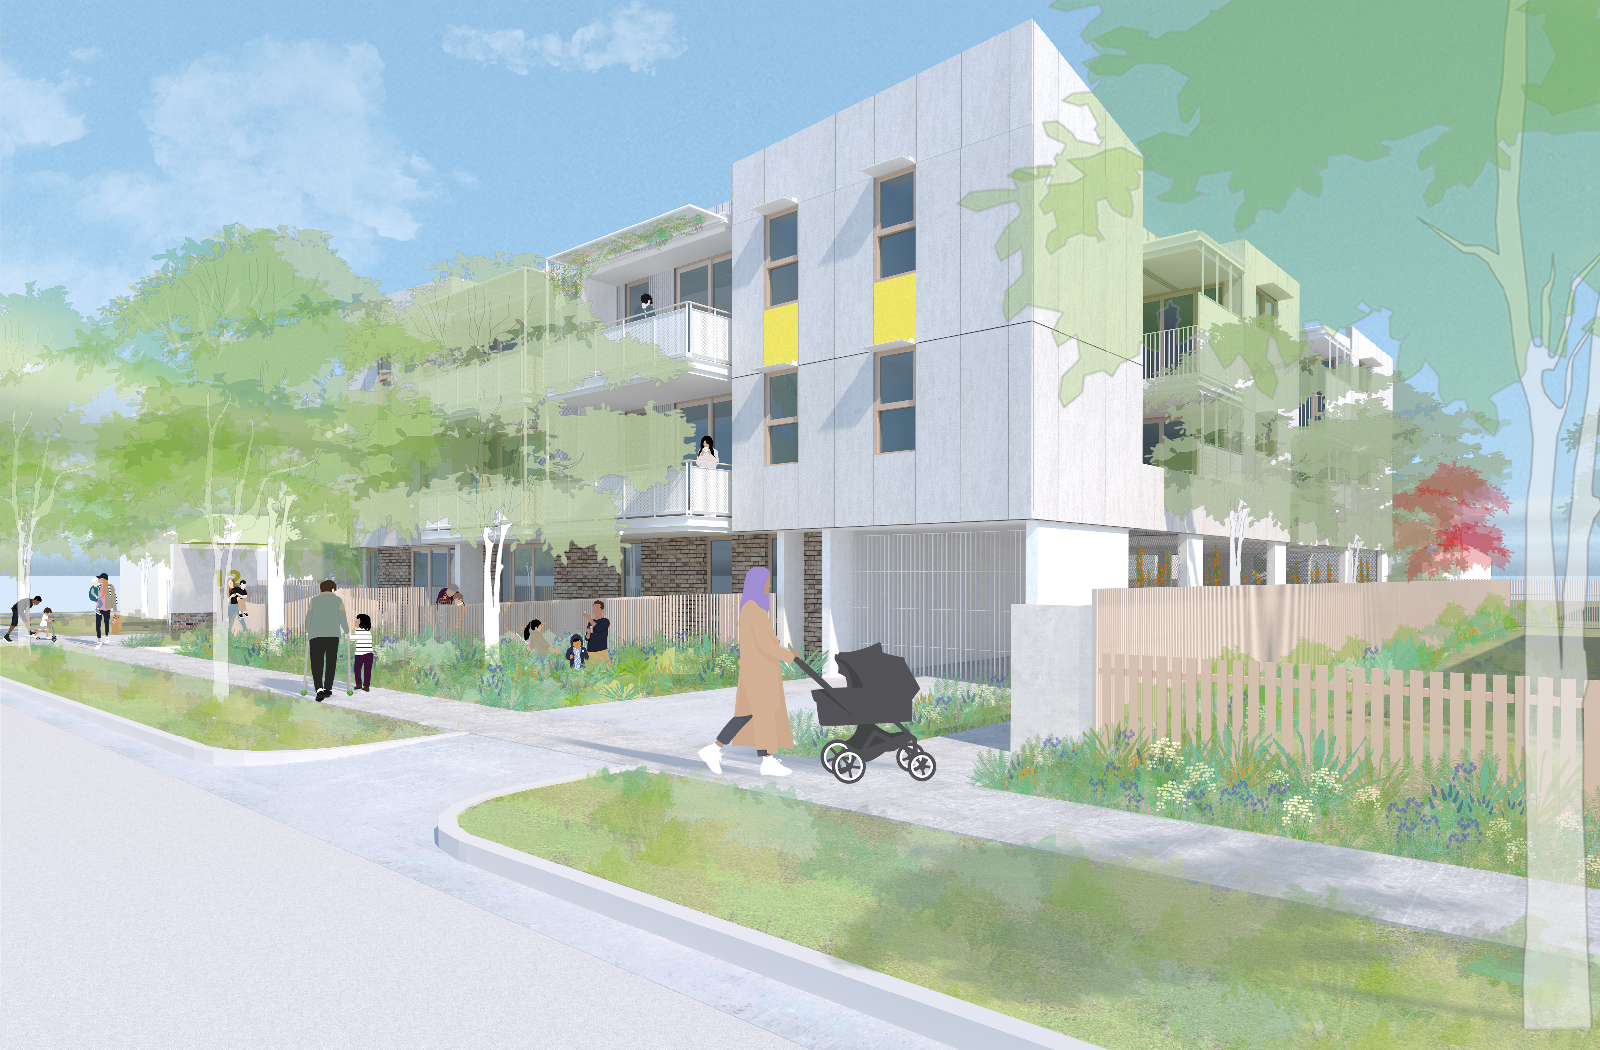 Future Homes Competition - Multi-residential project for better apartment designs by McGregor Westlake Architecture